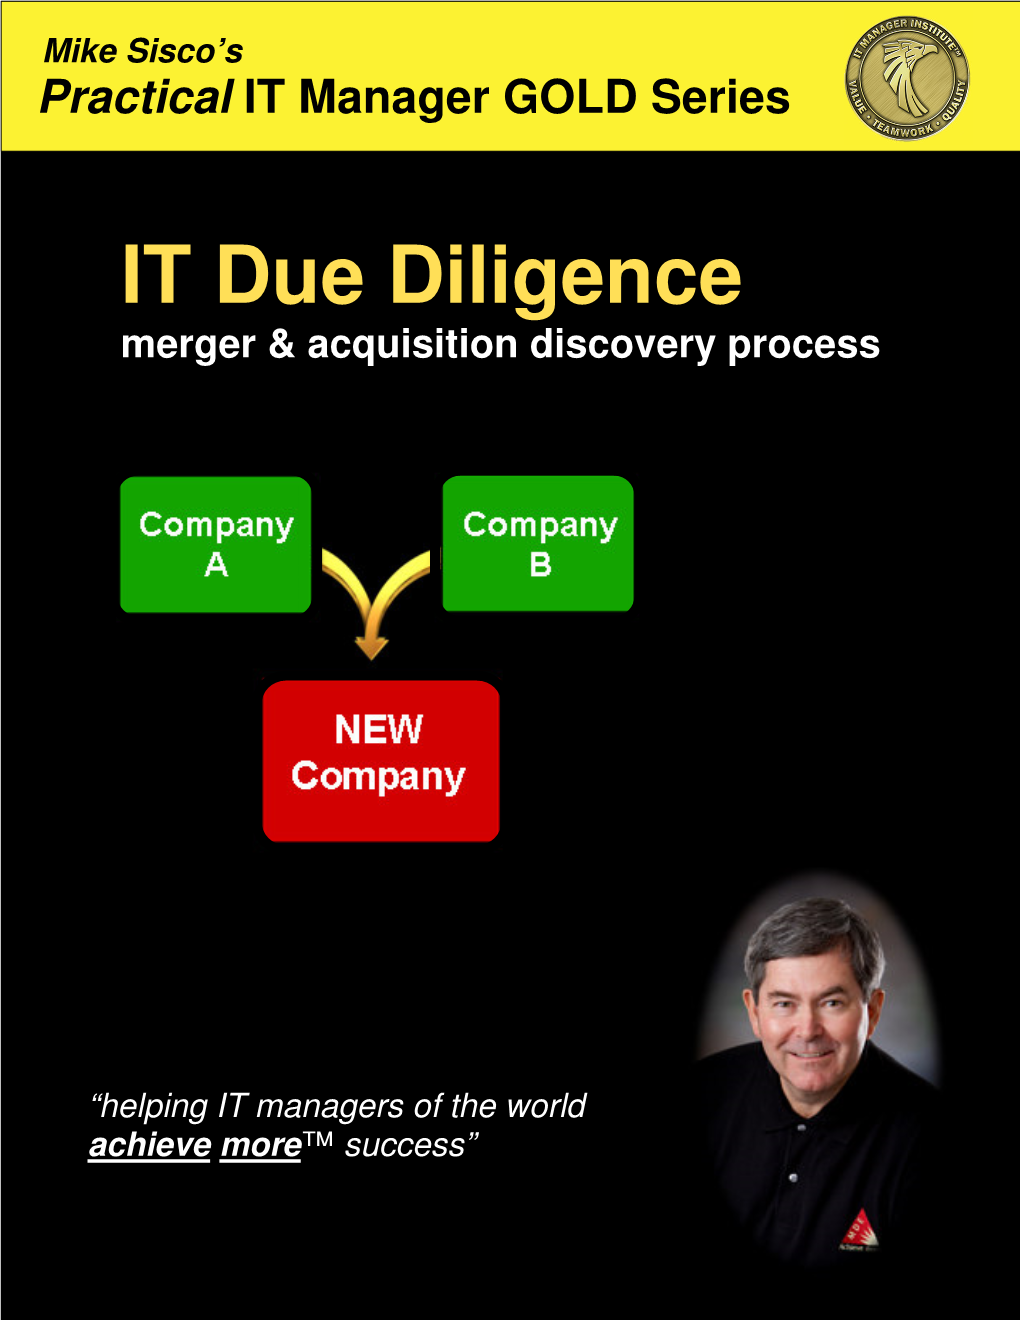 IT Due Diligence Merger & Acquisition Discovery Process